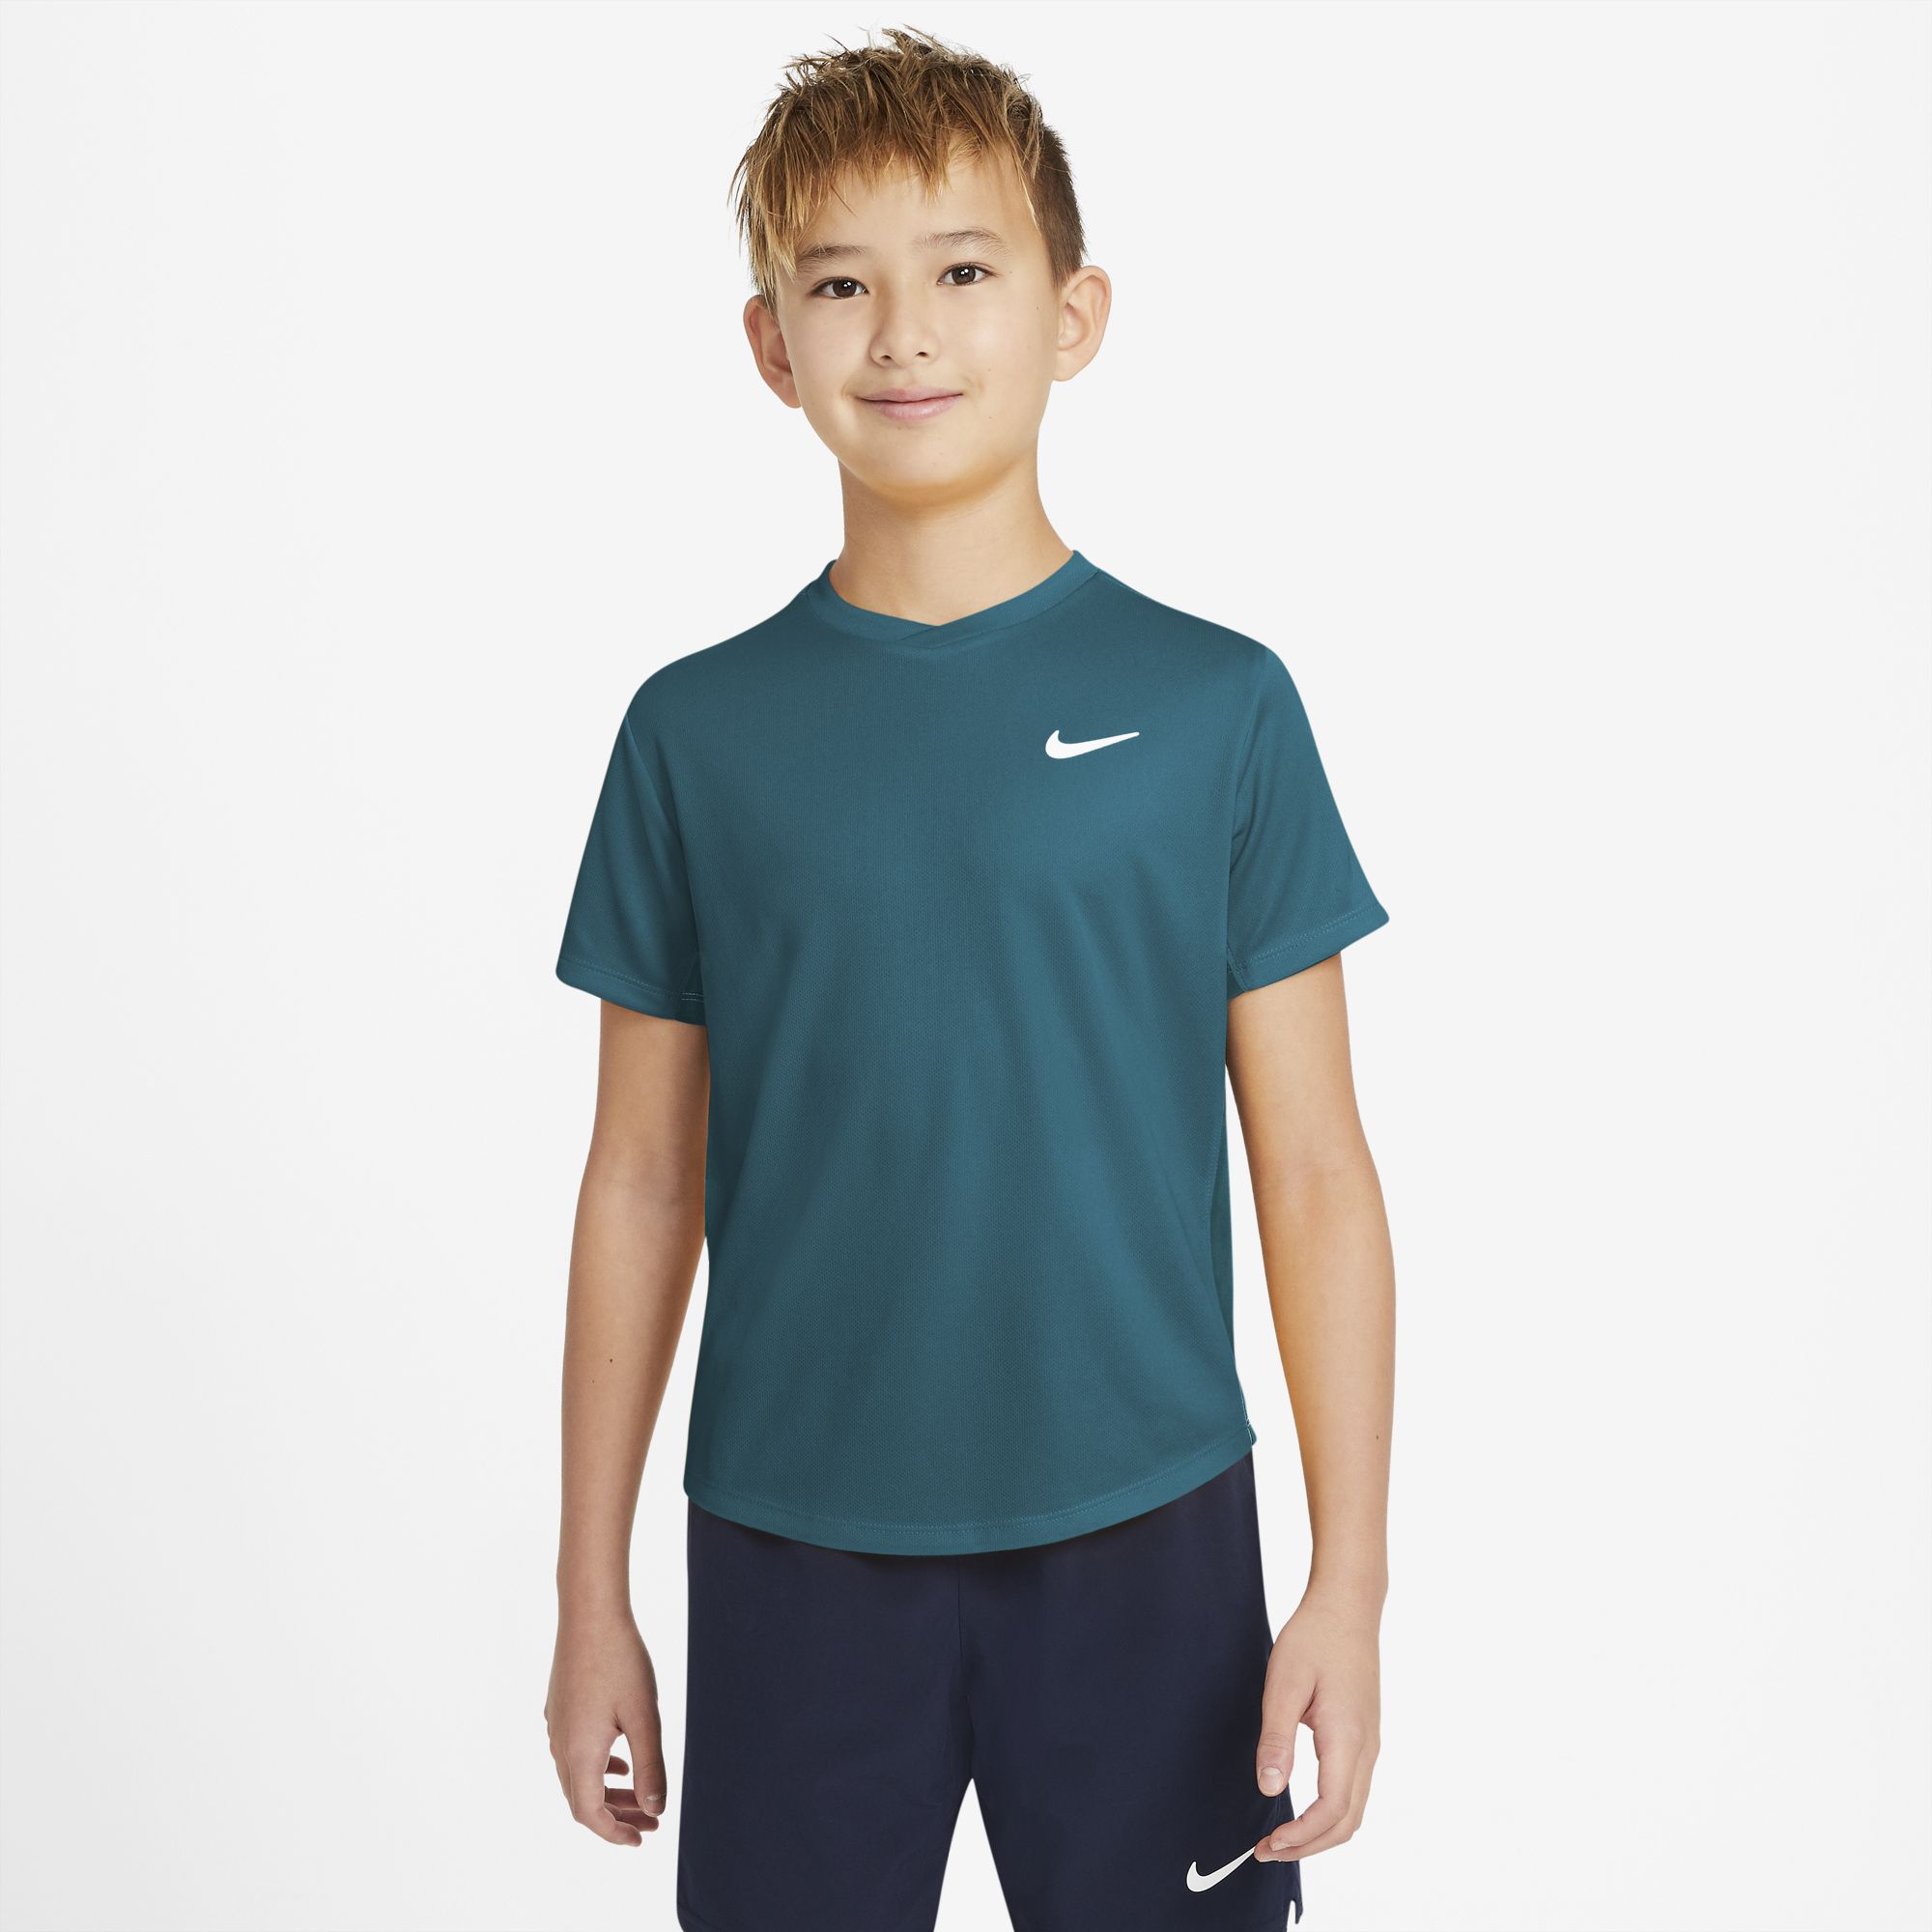 Nike Court Dr-Fit Victory Boy's Tennis Top